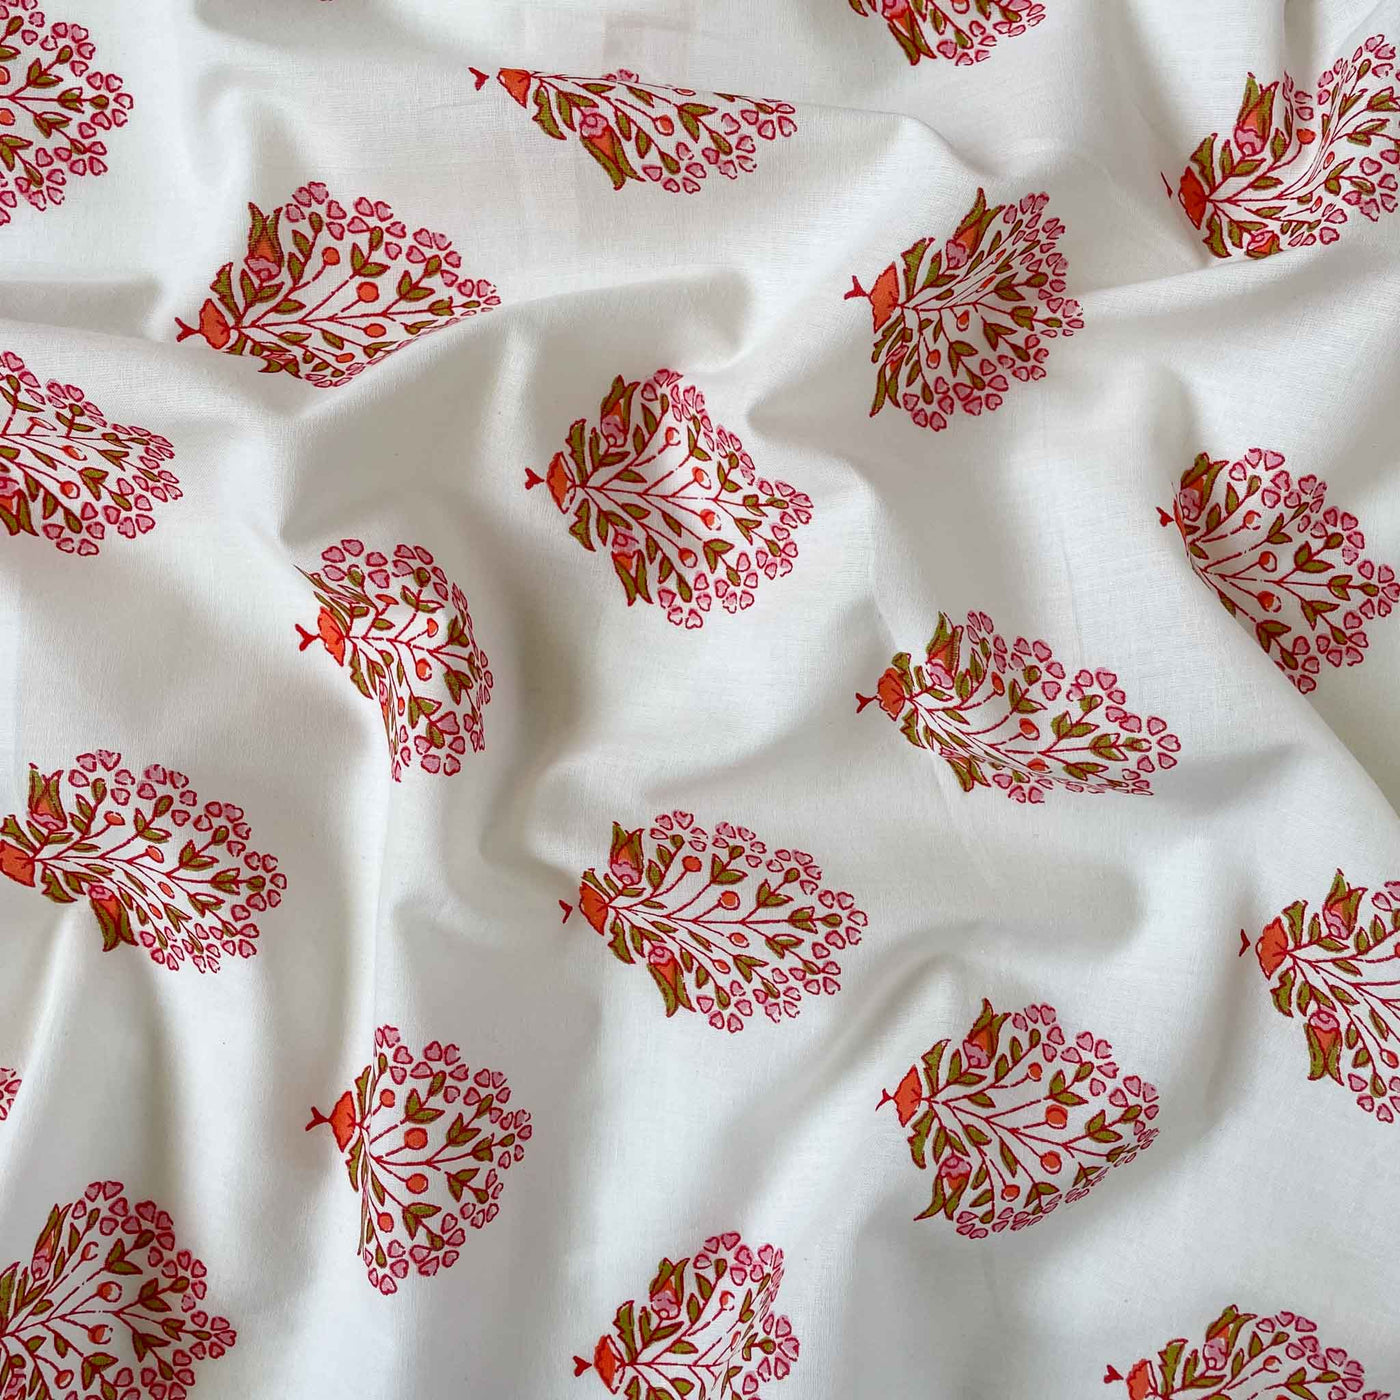 Fabric Pandit Cut Piece (CUT PIECE) White & Pink Flower Bunch Hand Block Printed Pure Cotton Fabric (Width 43 inches)